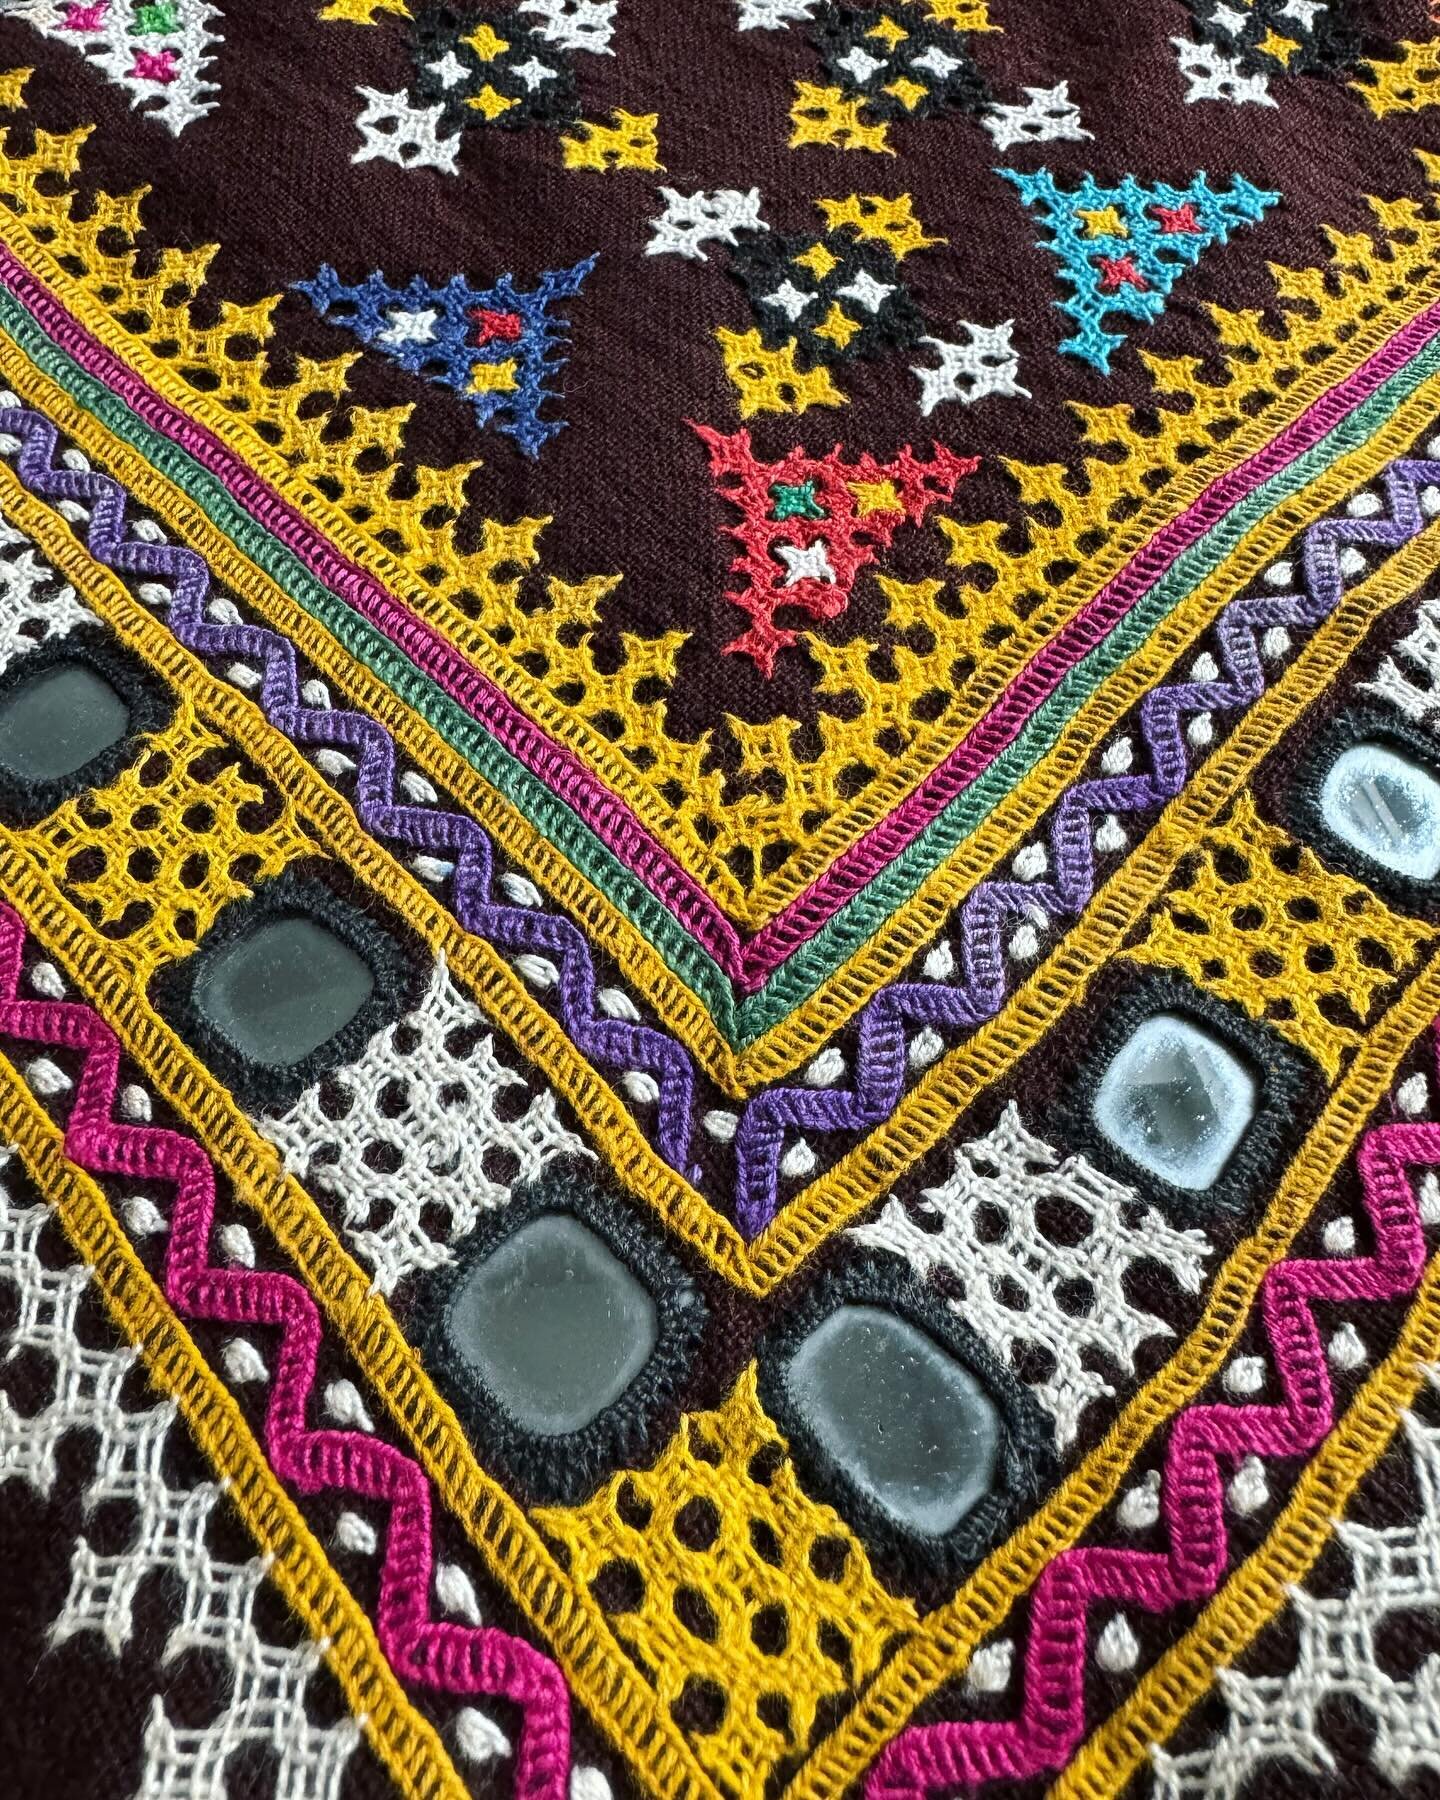 Wonderful interlacing stitch details of a baby cradle, from western Kutch. 😍 I love the colour combo against the dark brown! 
#embroidery #kutch #babycradle #textiles #vintage #handstitch #handwoven #mirrorwork